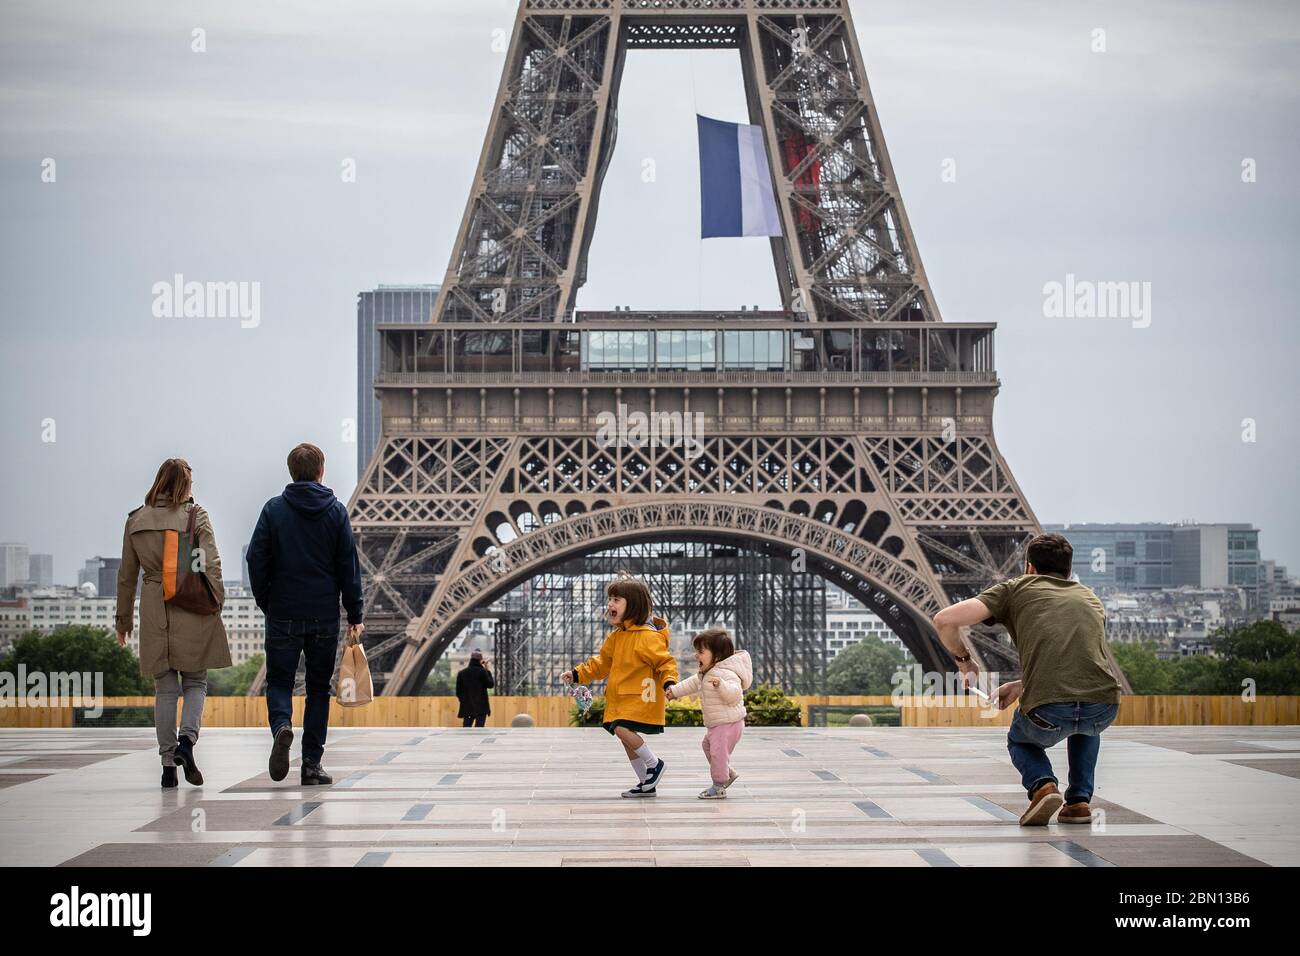 Paris, France. 11th May, 2020. People enjoy themselves at the Trocadero Palace in Paris, France, May 11, 2020. France on Monday cautiously started a gradual process to return to normalcy, easing some restrictions while maintaining others to avoid a new epidemic wave. Credit: Aurelien Morissard/Xinhua/Alamy Live News Stock Photo